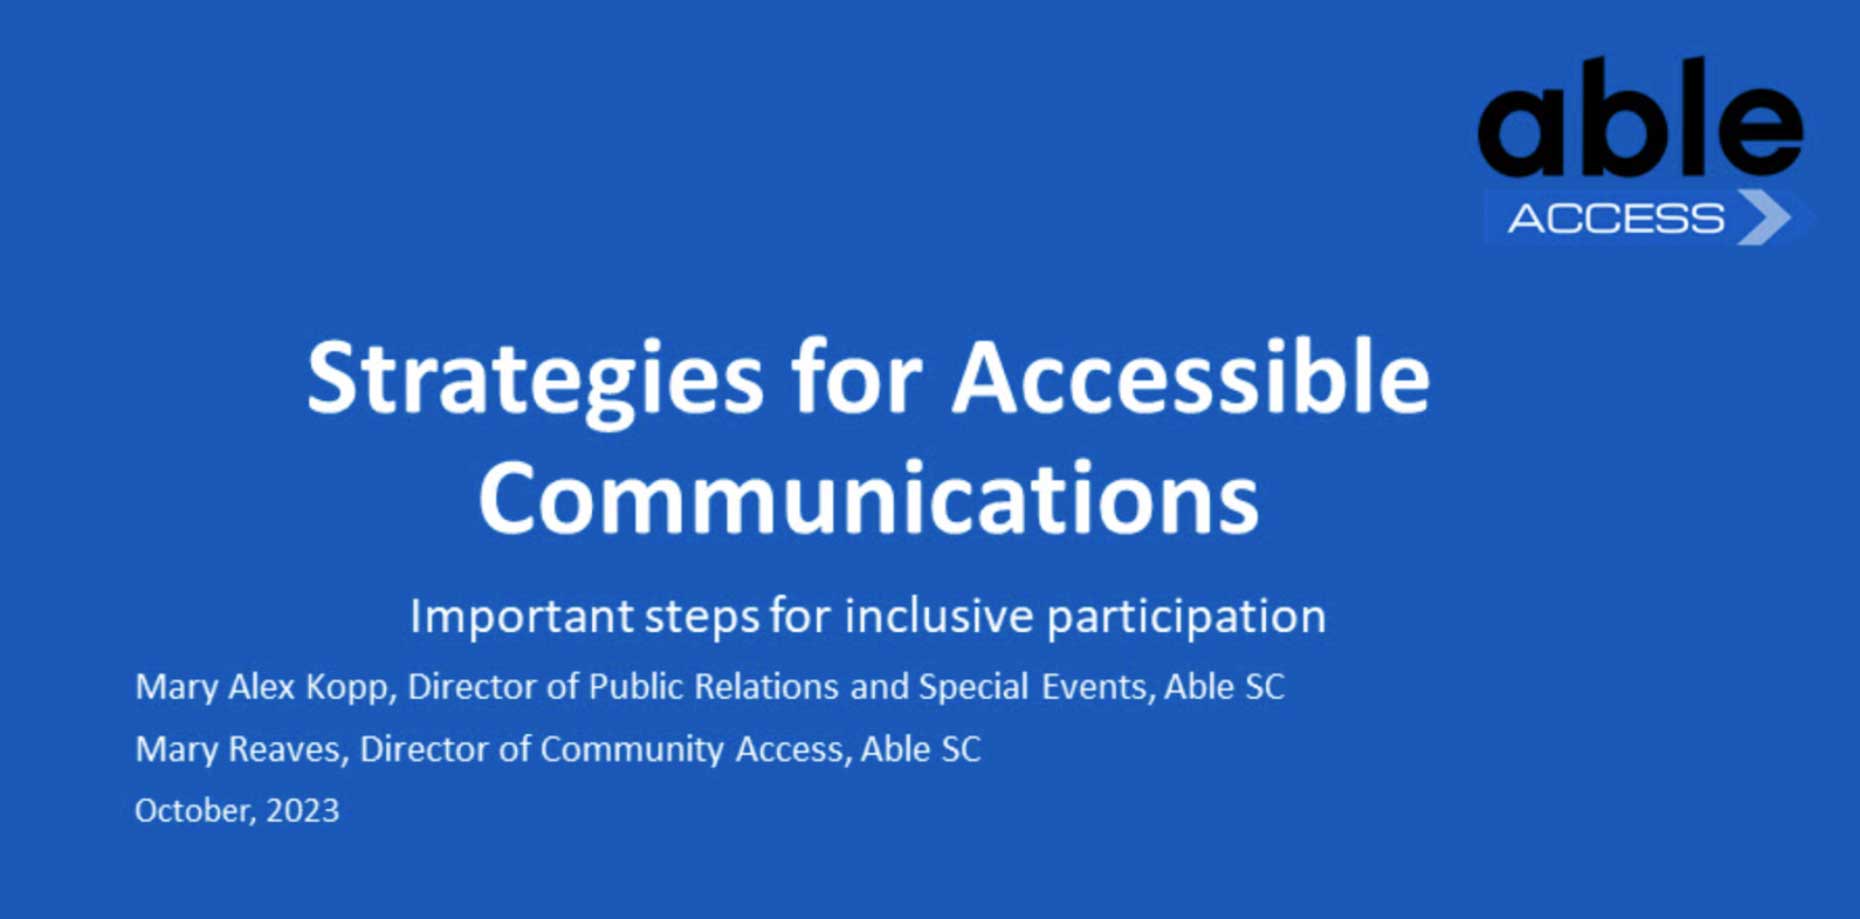 Strategies for Accessible Communications